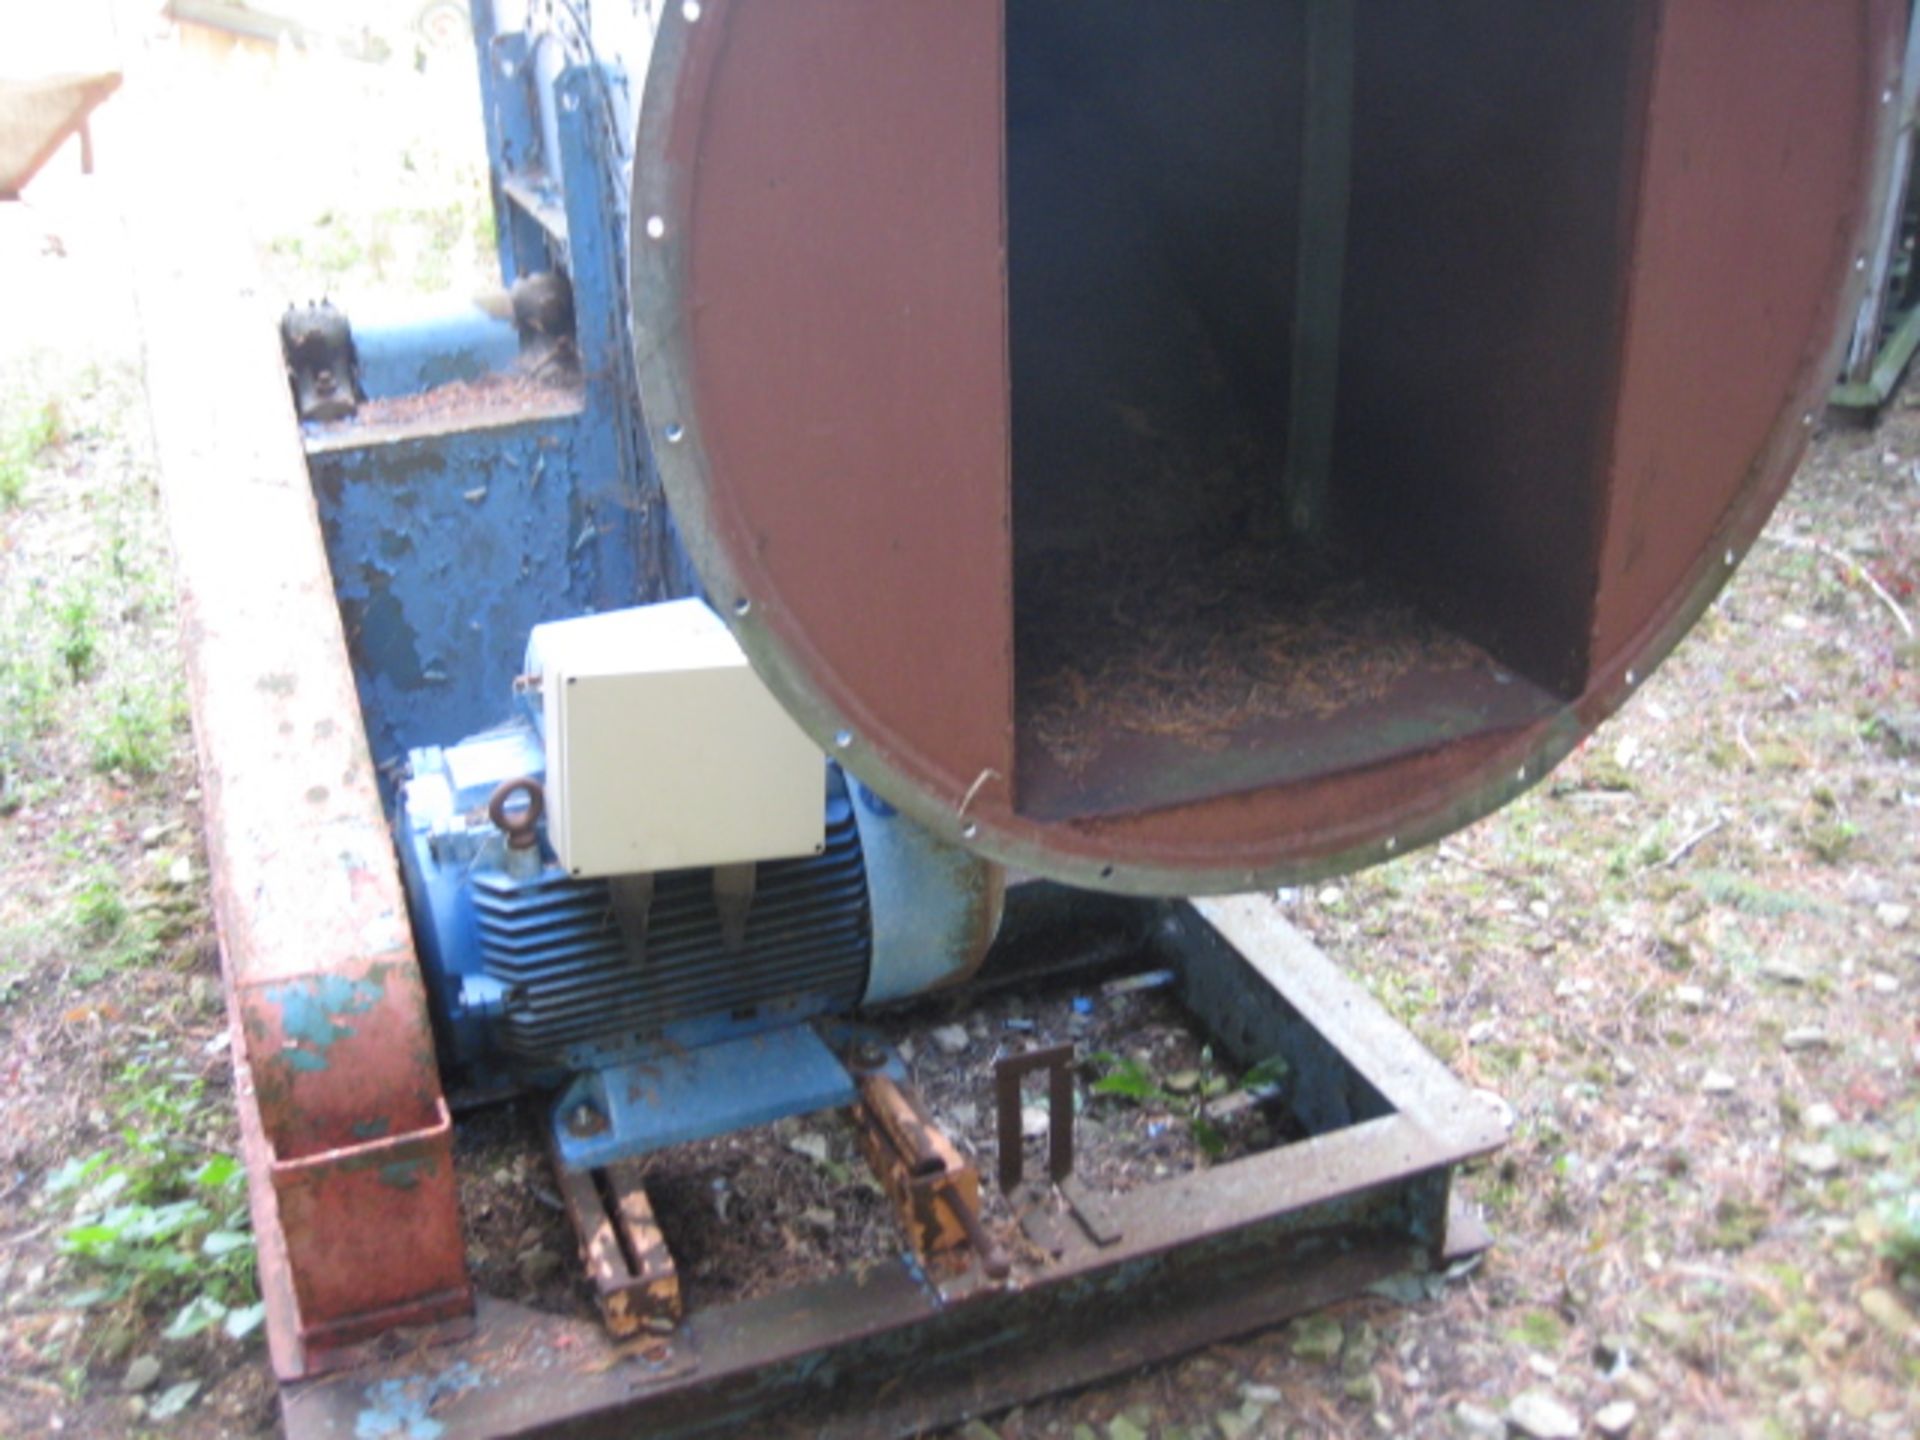 Provenair 30B Centrifugal Belt Driven Fan, size C75, with 30kW motor, loading free of charge - - Image 2 of 5